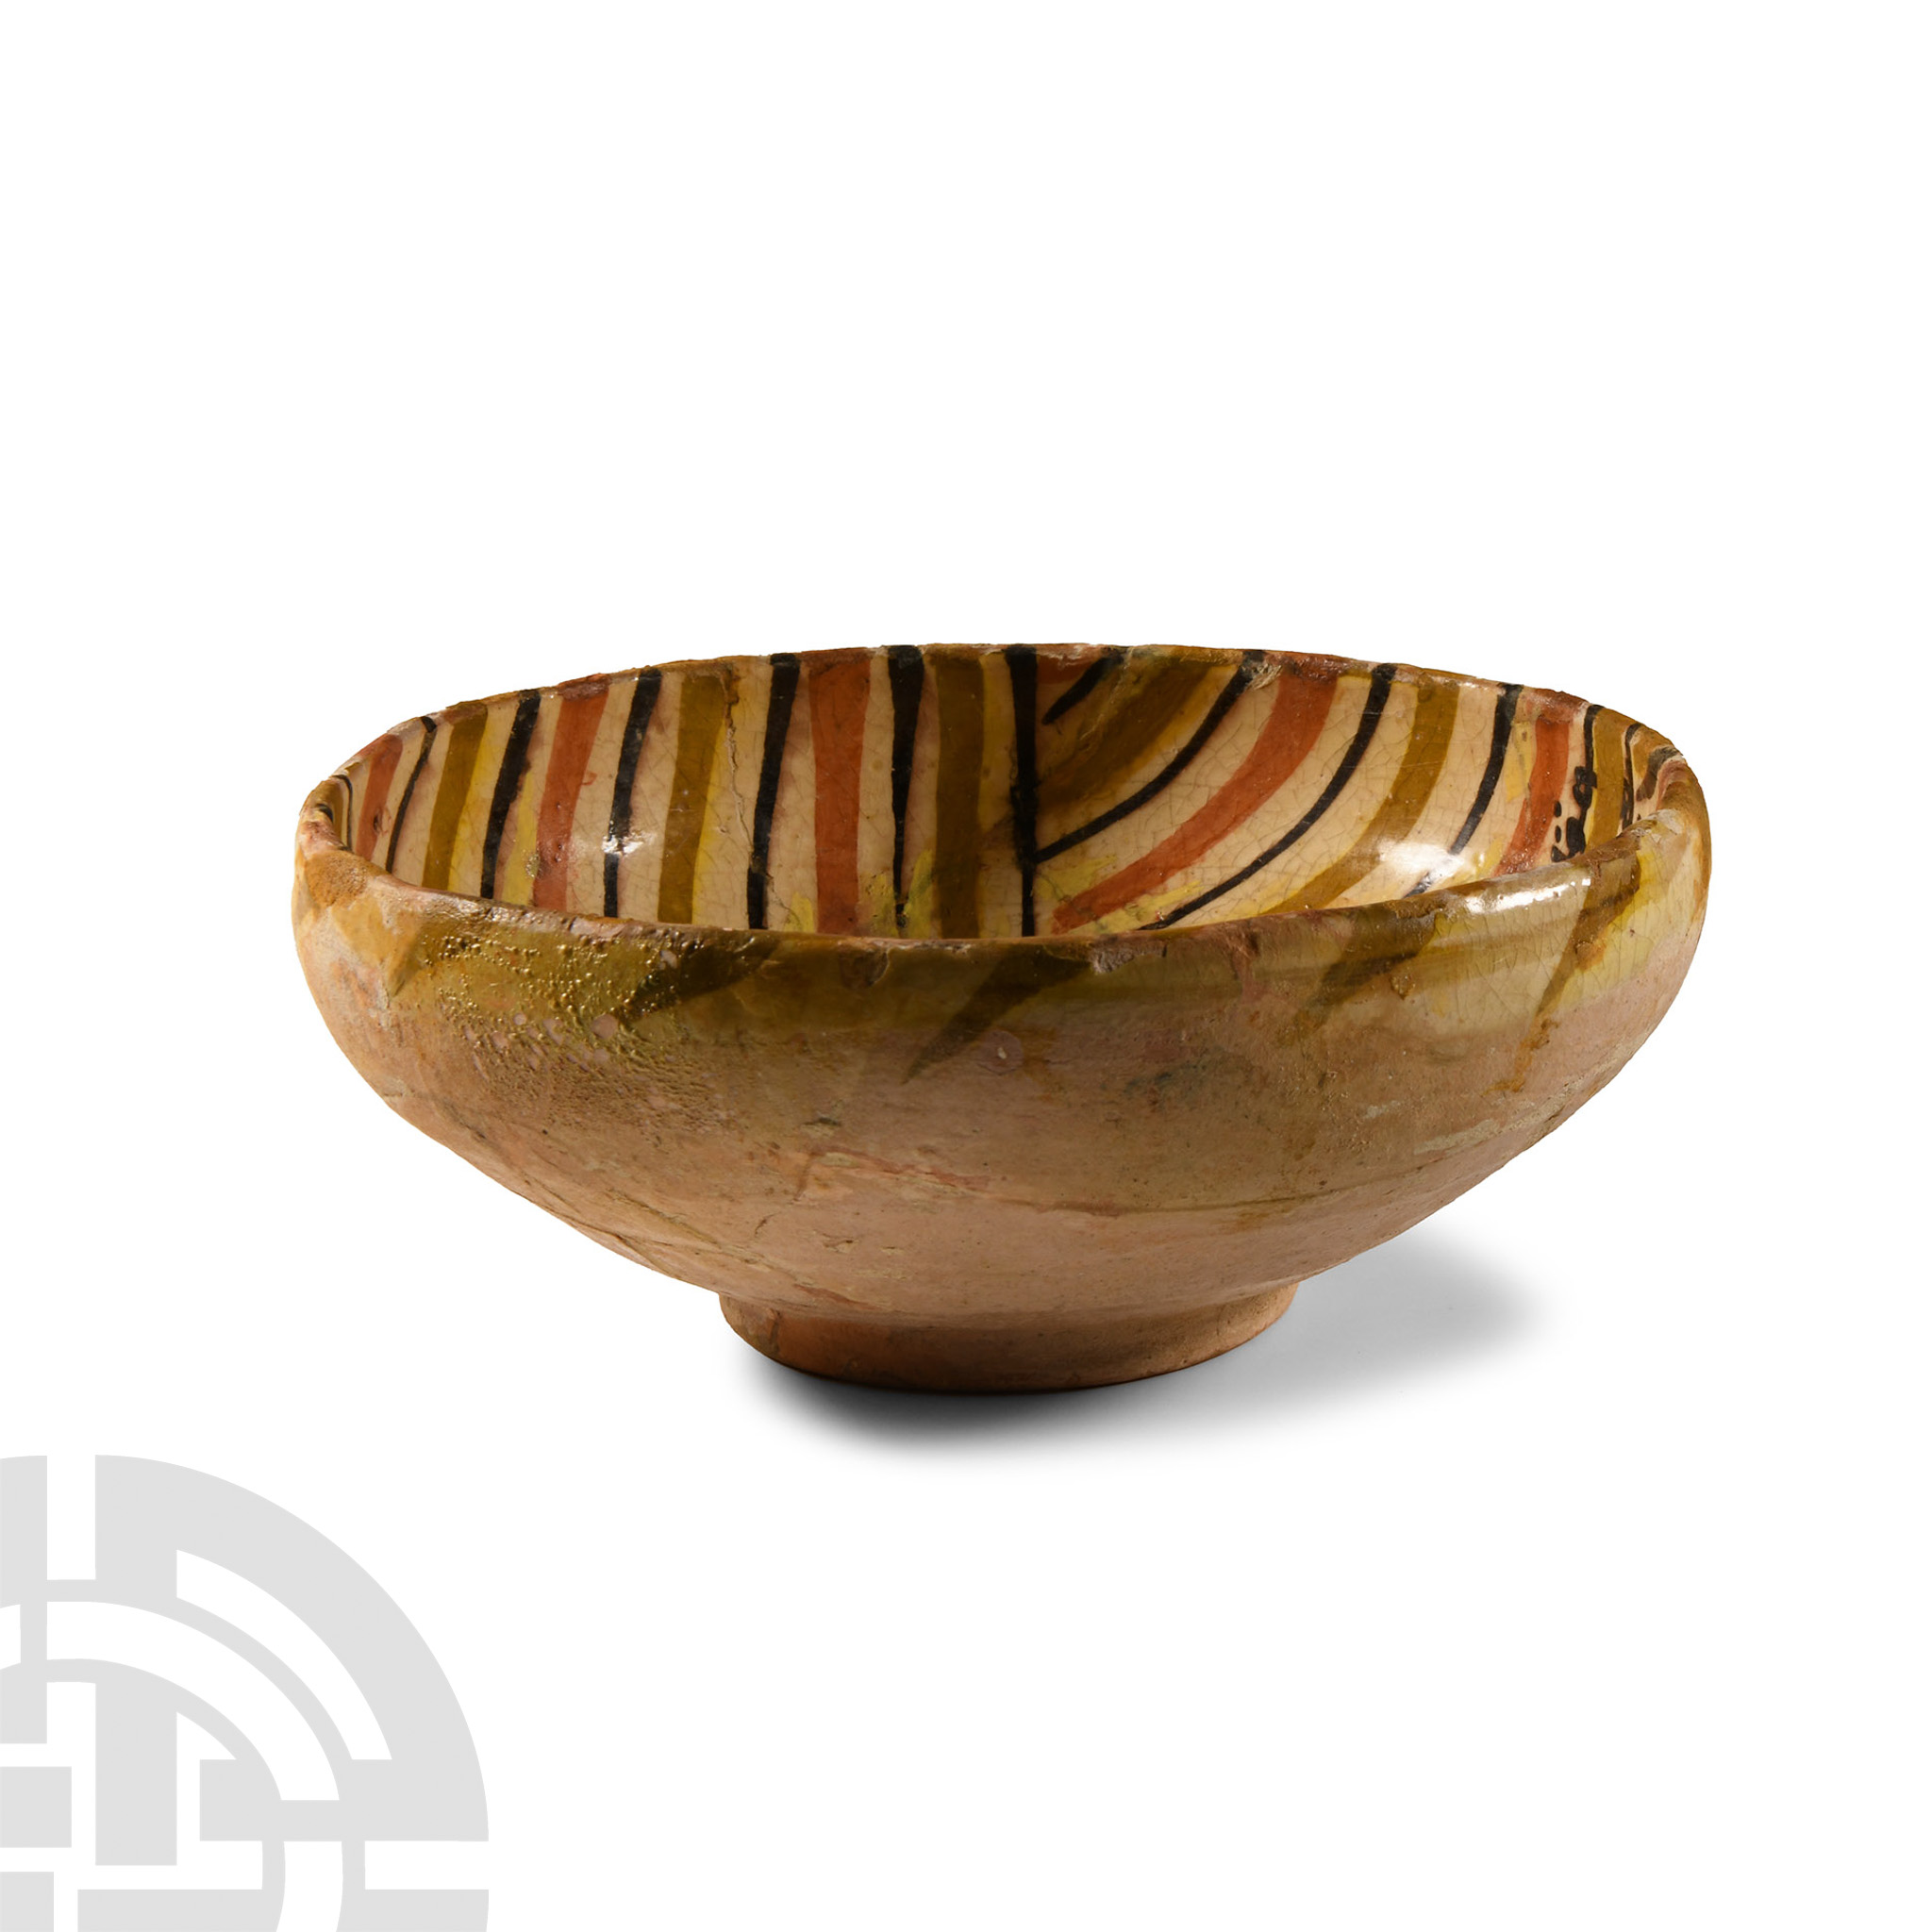 Central Asian Pottery Bowl with Kufic Inscription - Image 2 of 2